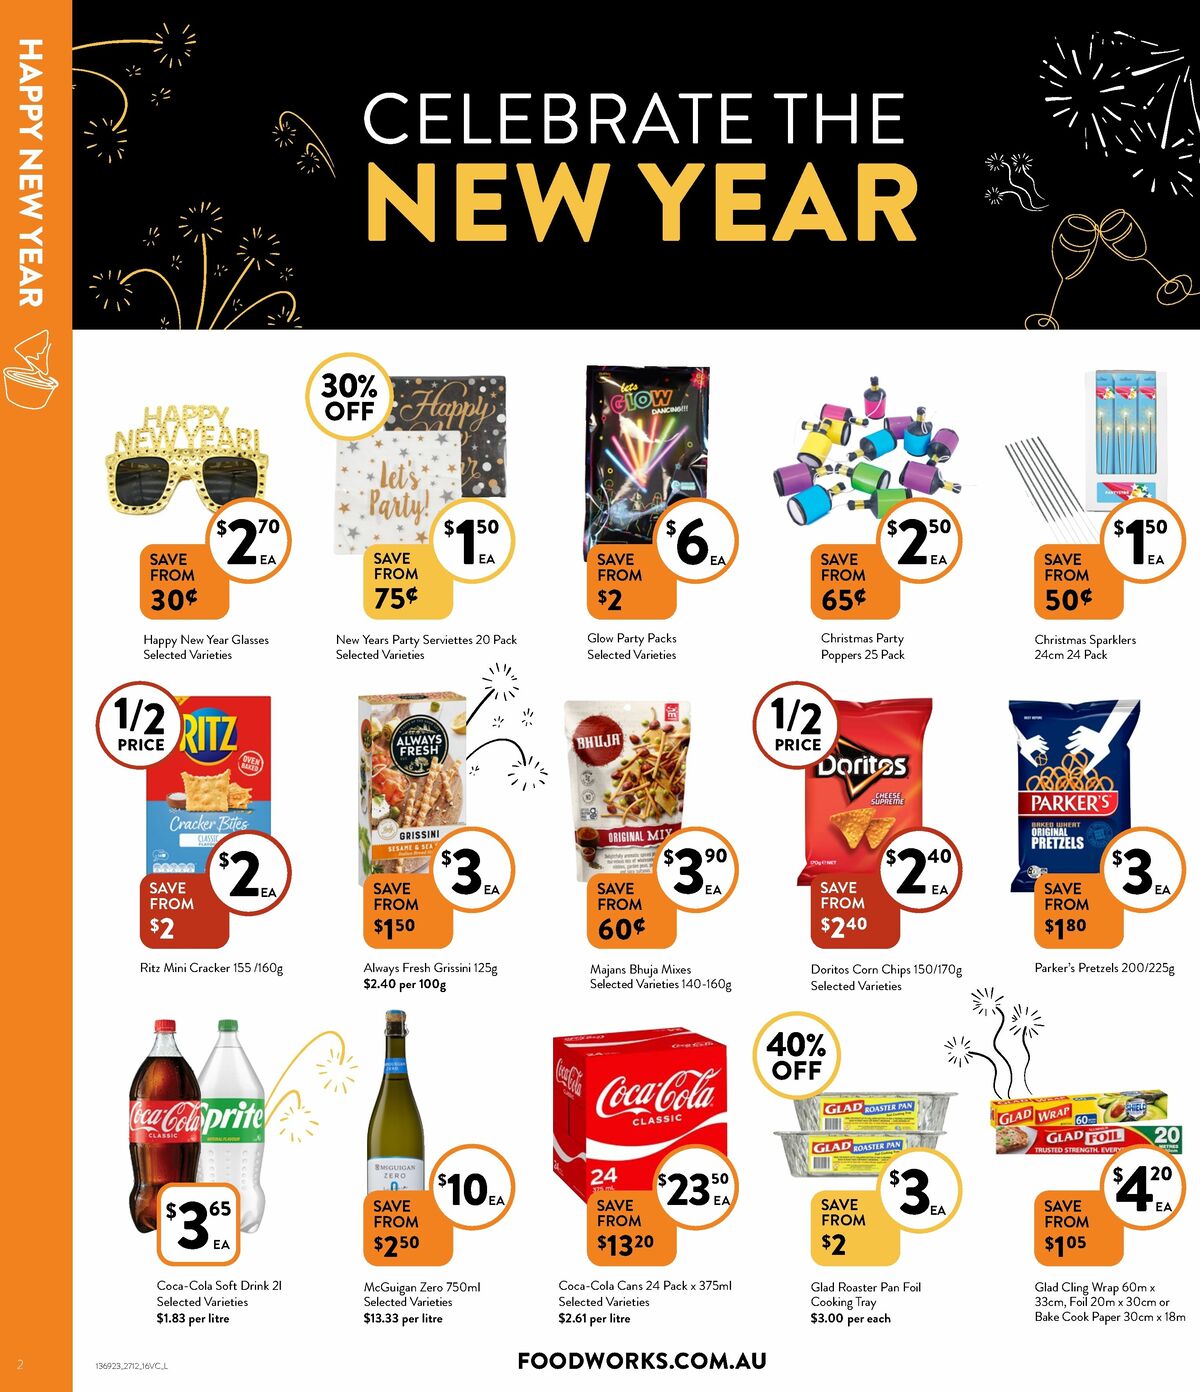 FoodWorks Supermarket Catalogues from 27 December